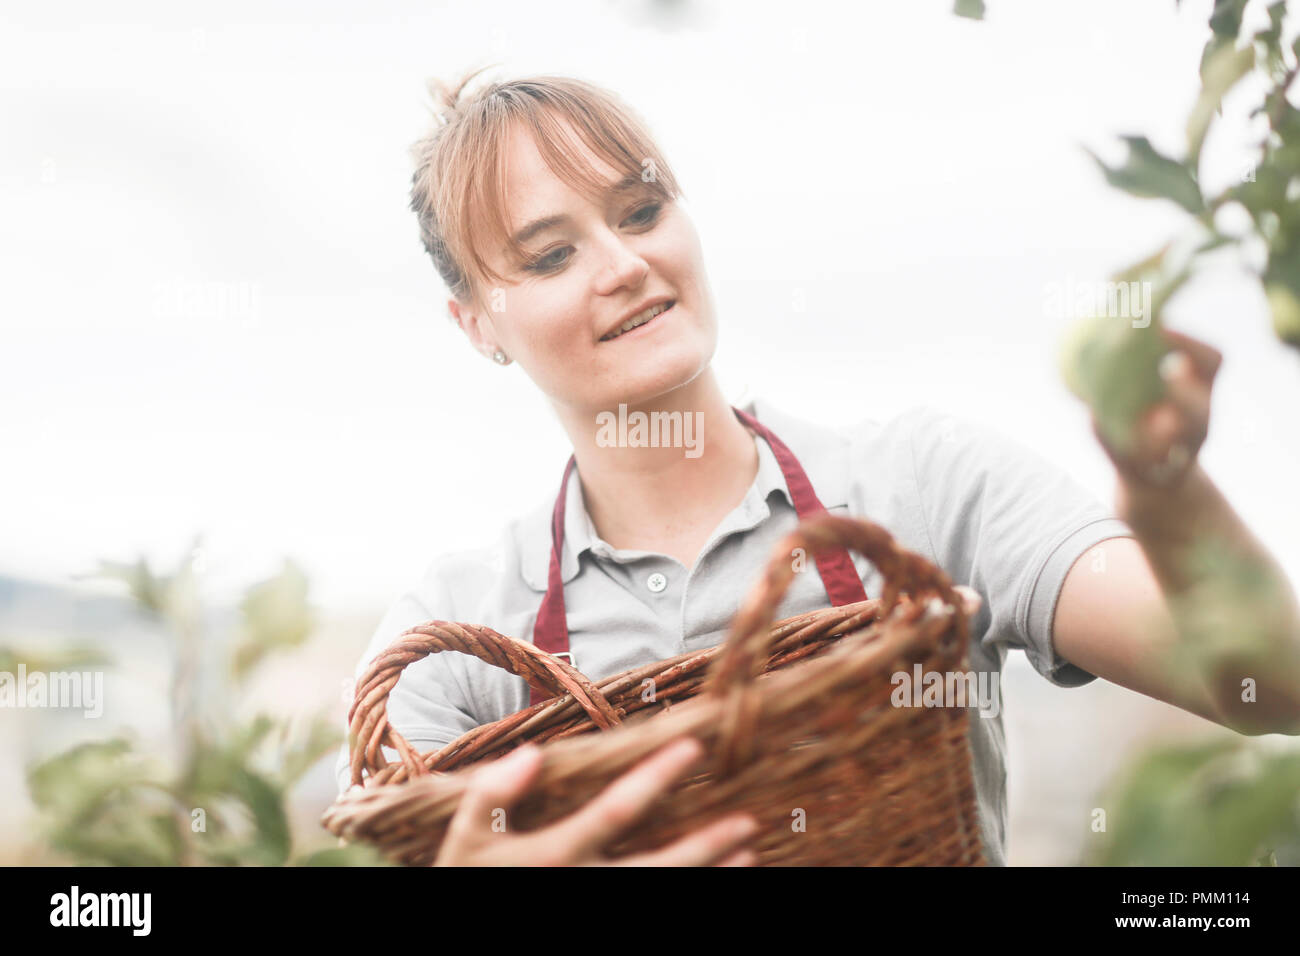 Woman harvesting apples from a tree, Germany Stock Photo